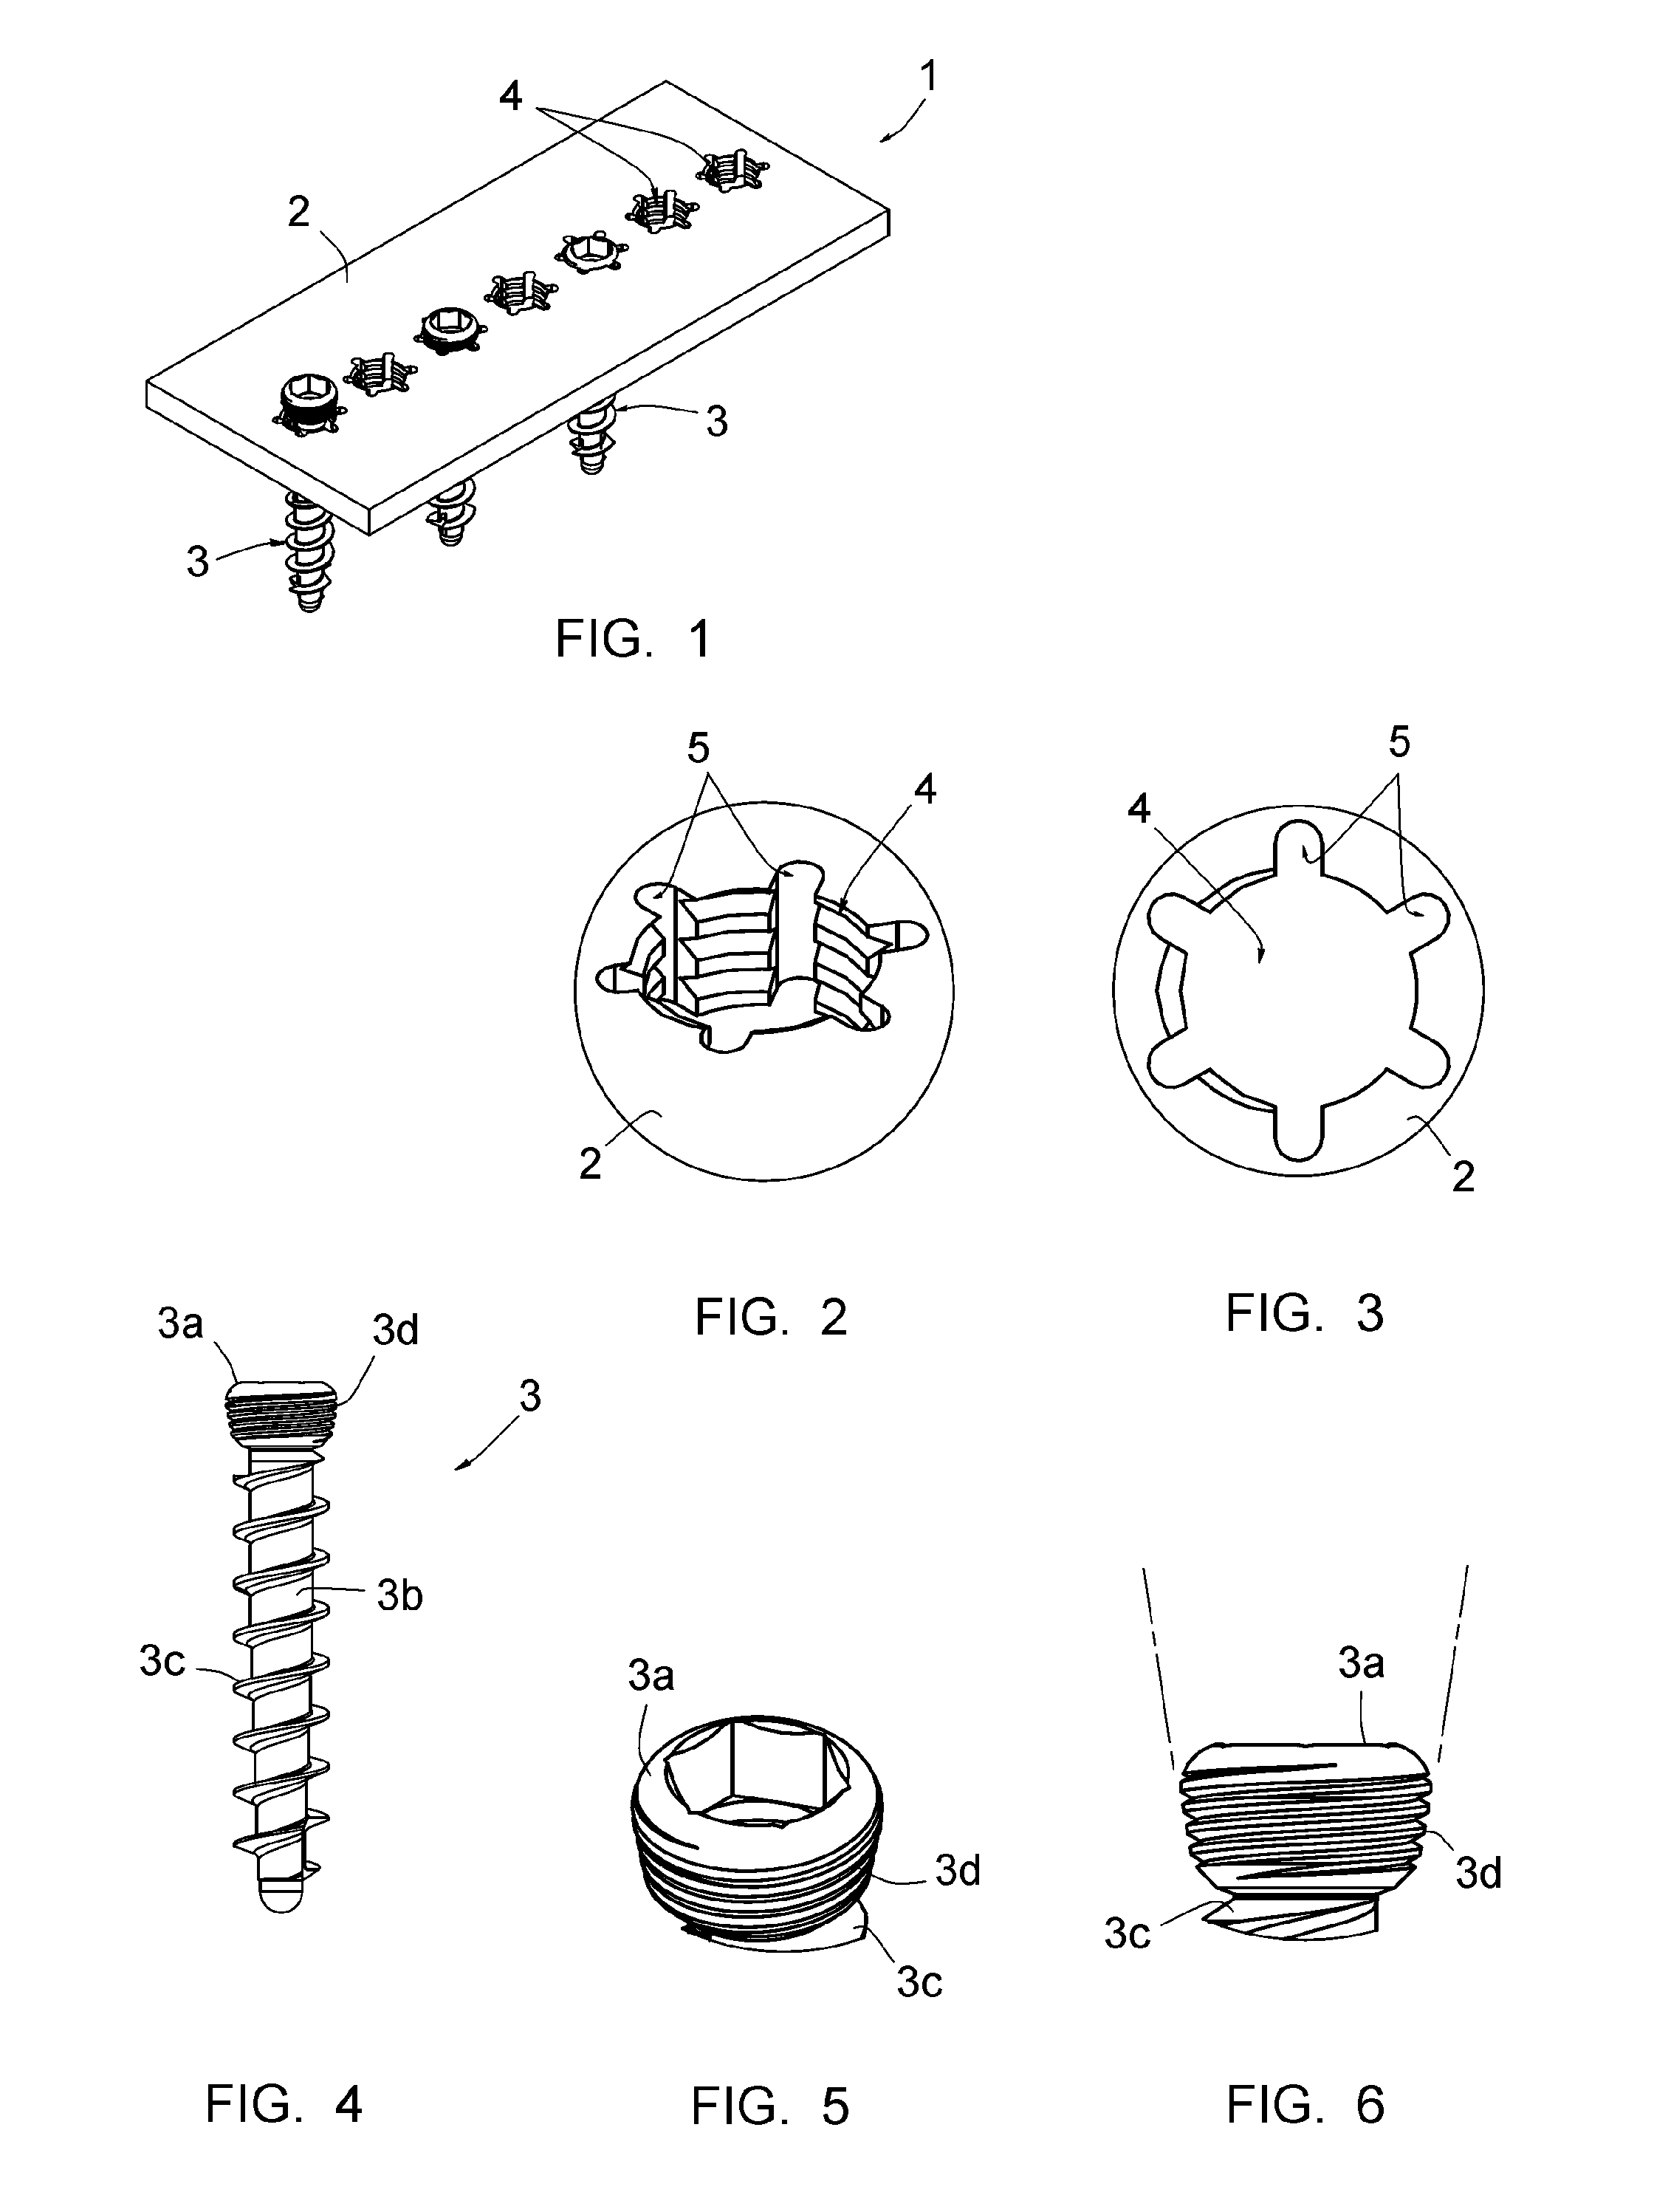 Assembly comprising an implantable part designed to be fastened to one or more bones or bone portions to be joined, and at least one screw for fastening the implantable part to said bone(s)